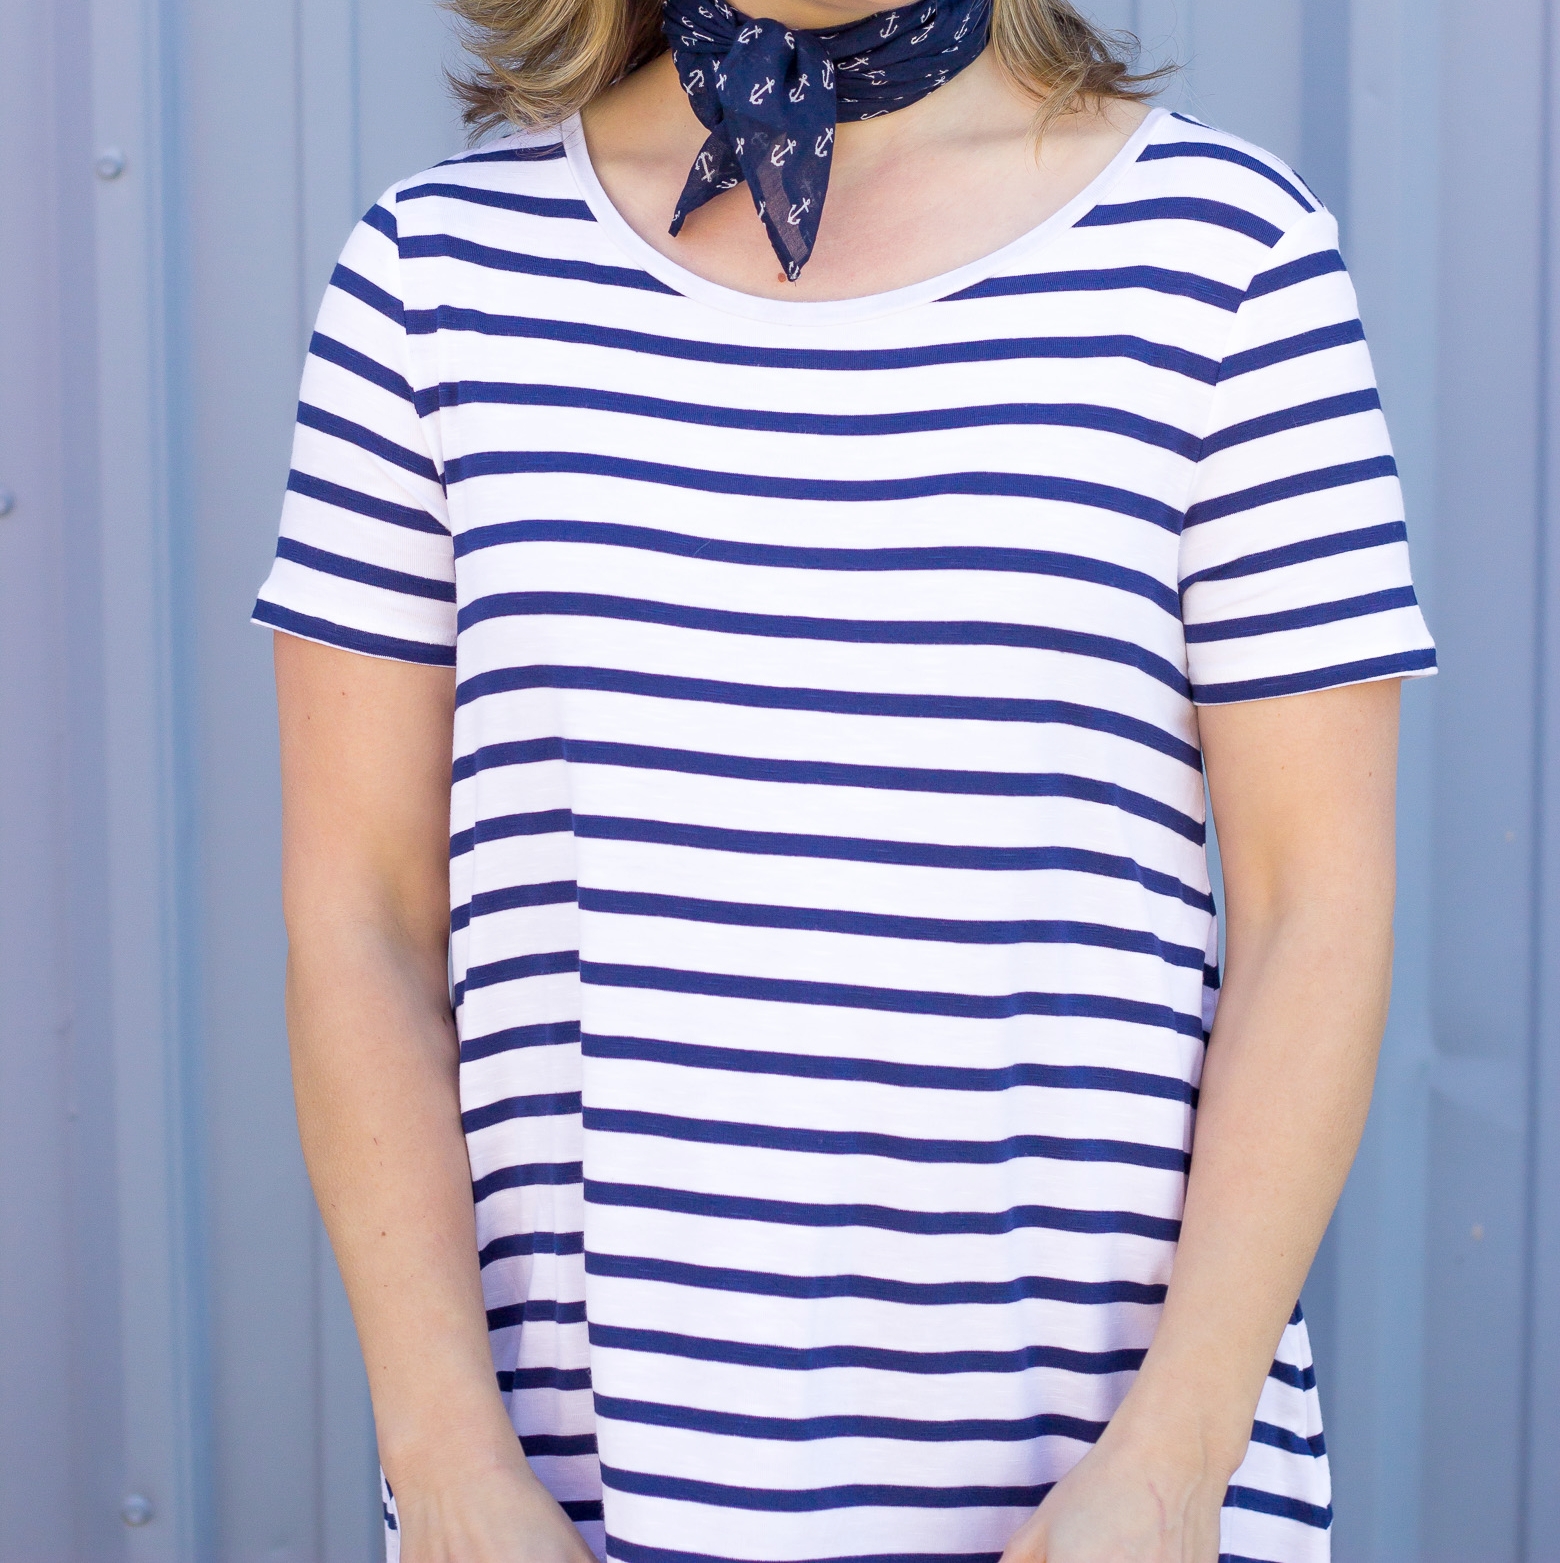 Old Navy nautical style on Belle Meets World blog